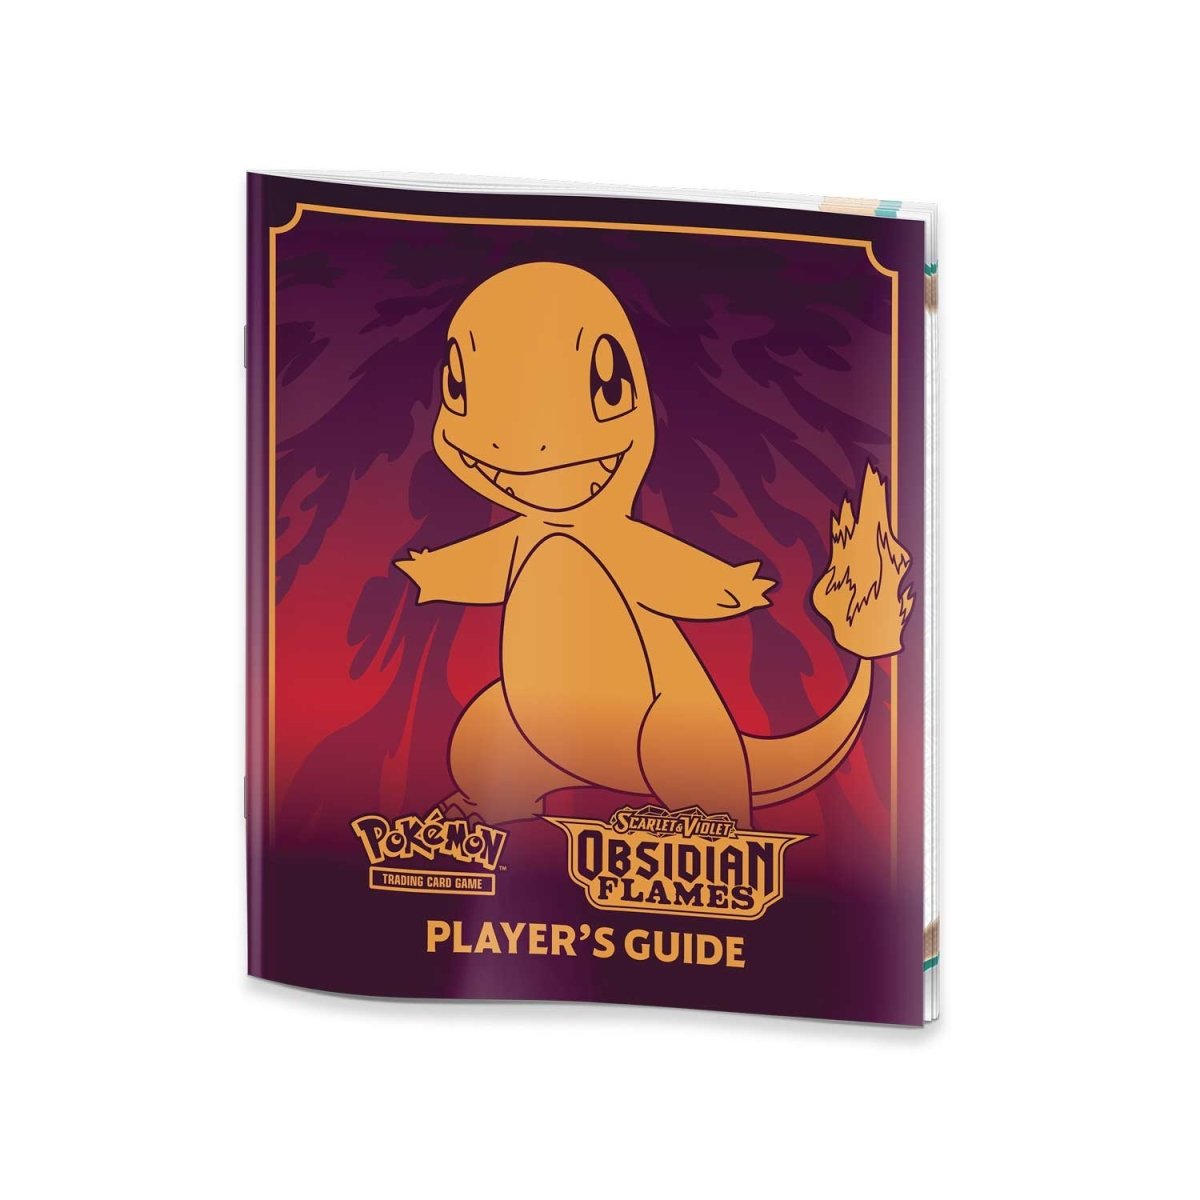 
                  
                    Image of the Pokémon TCG: Scarlet & Violet—Obsidian Flames Pokémon Center Elite Trainer Box. It's a collection of gameplay elements like booster packs, featuring a radiant Charizard ex, Charmander themed card sleeves, and other components. Box contents include 9 booster packs, each containing 10 cards and 1 Basic Energy, plus additional gaming accessories.
                  
                